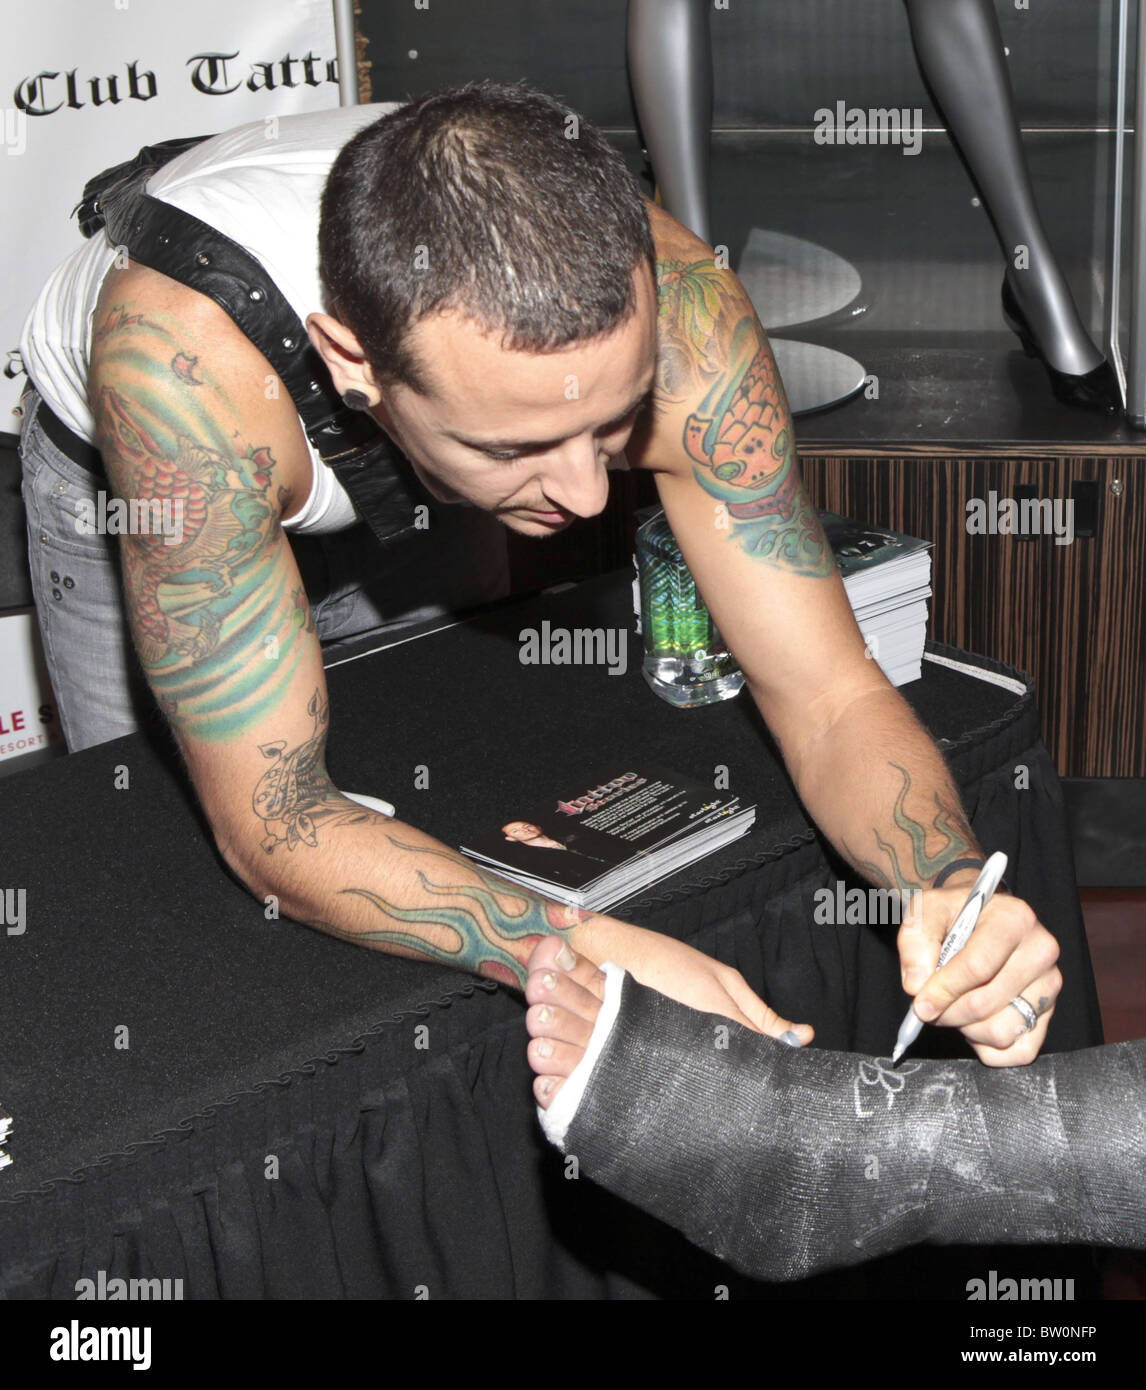 Linkin Park mainly Chester Bennington and tattoos Getting a tattoo is  painful It teaches me humility reminds  VK